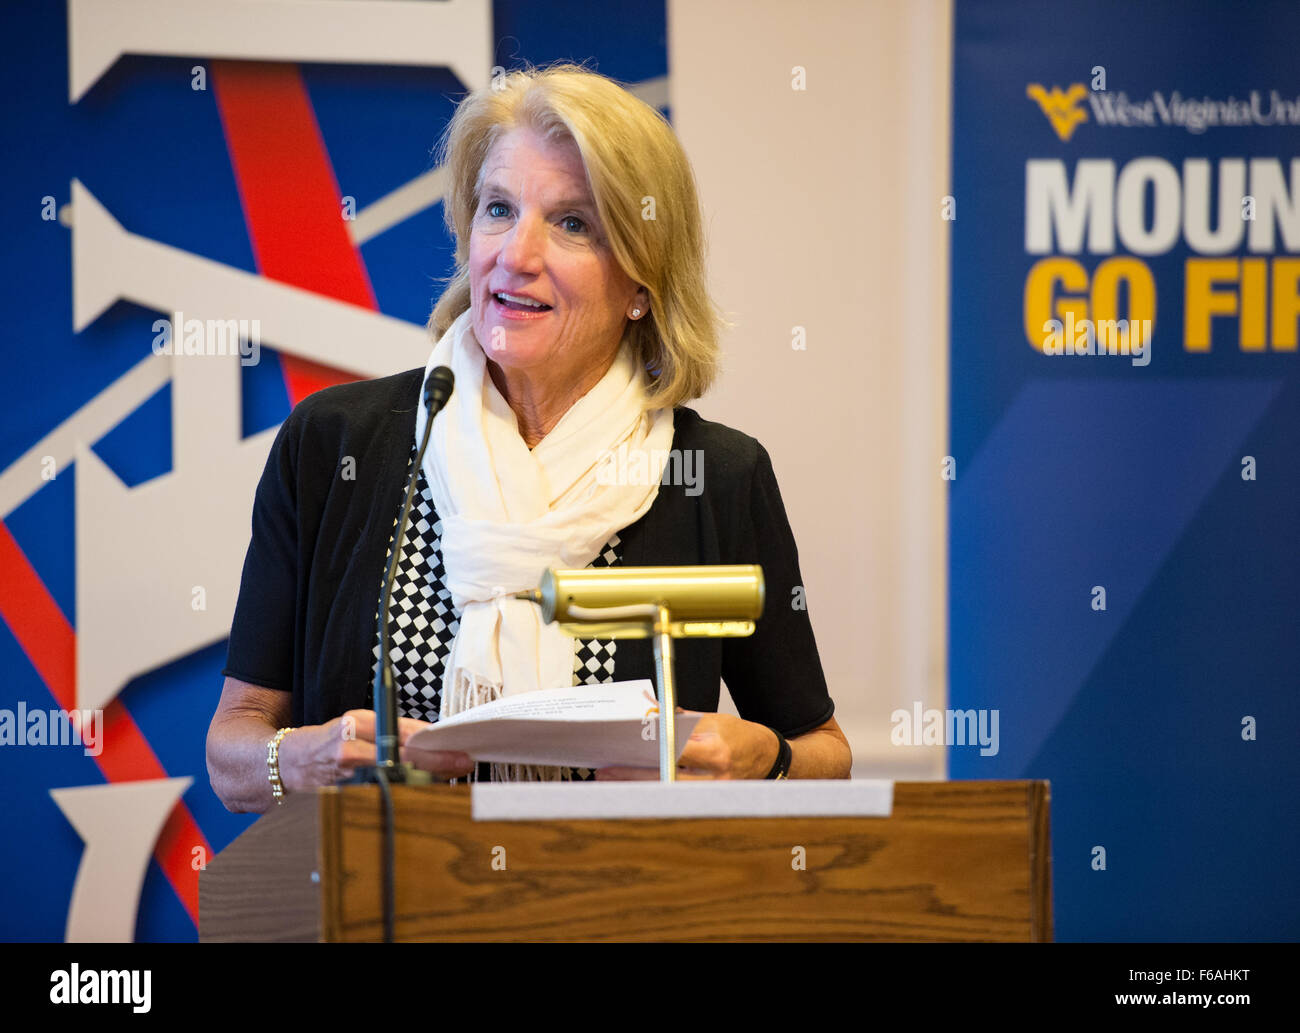 Senator Shelley Moore Capito (R-W.Va.)  speaks at an event to honor the winners of the 2015 Sample Return Robot Challenge, the Mountaineers team, on Monday, Sept. 21, 2015 at the Russell Senate Office Building in Washington, DC. The Mountaineers were awarded $100,000 in prize money for successfully completing Level 2 of the Sample Return Robot Challenge at Worcester Polytechnic Institute in Massachusetts June 10-12. Photo Credit: (NASA/Aubrey Gemignani). Stock Photo